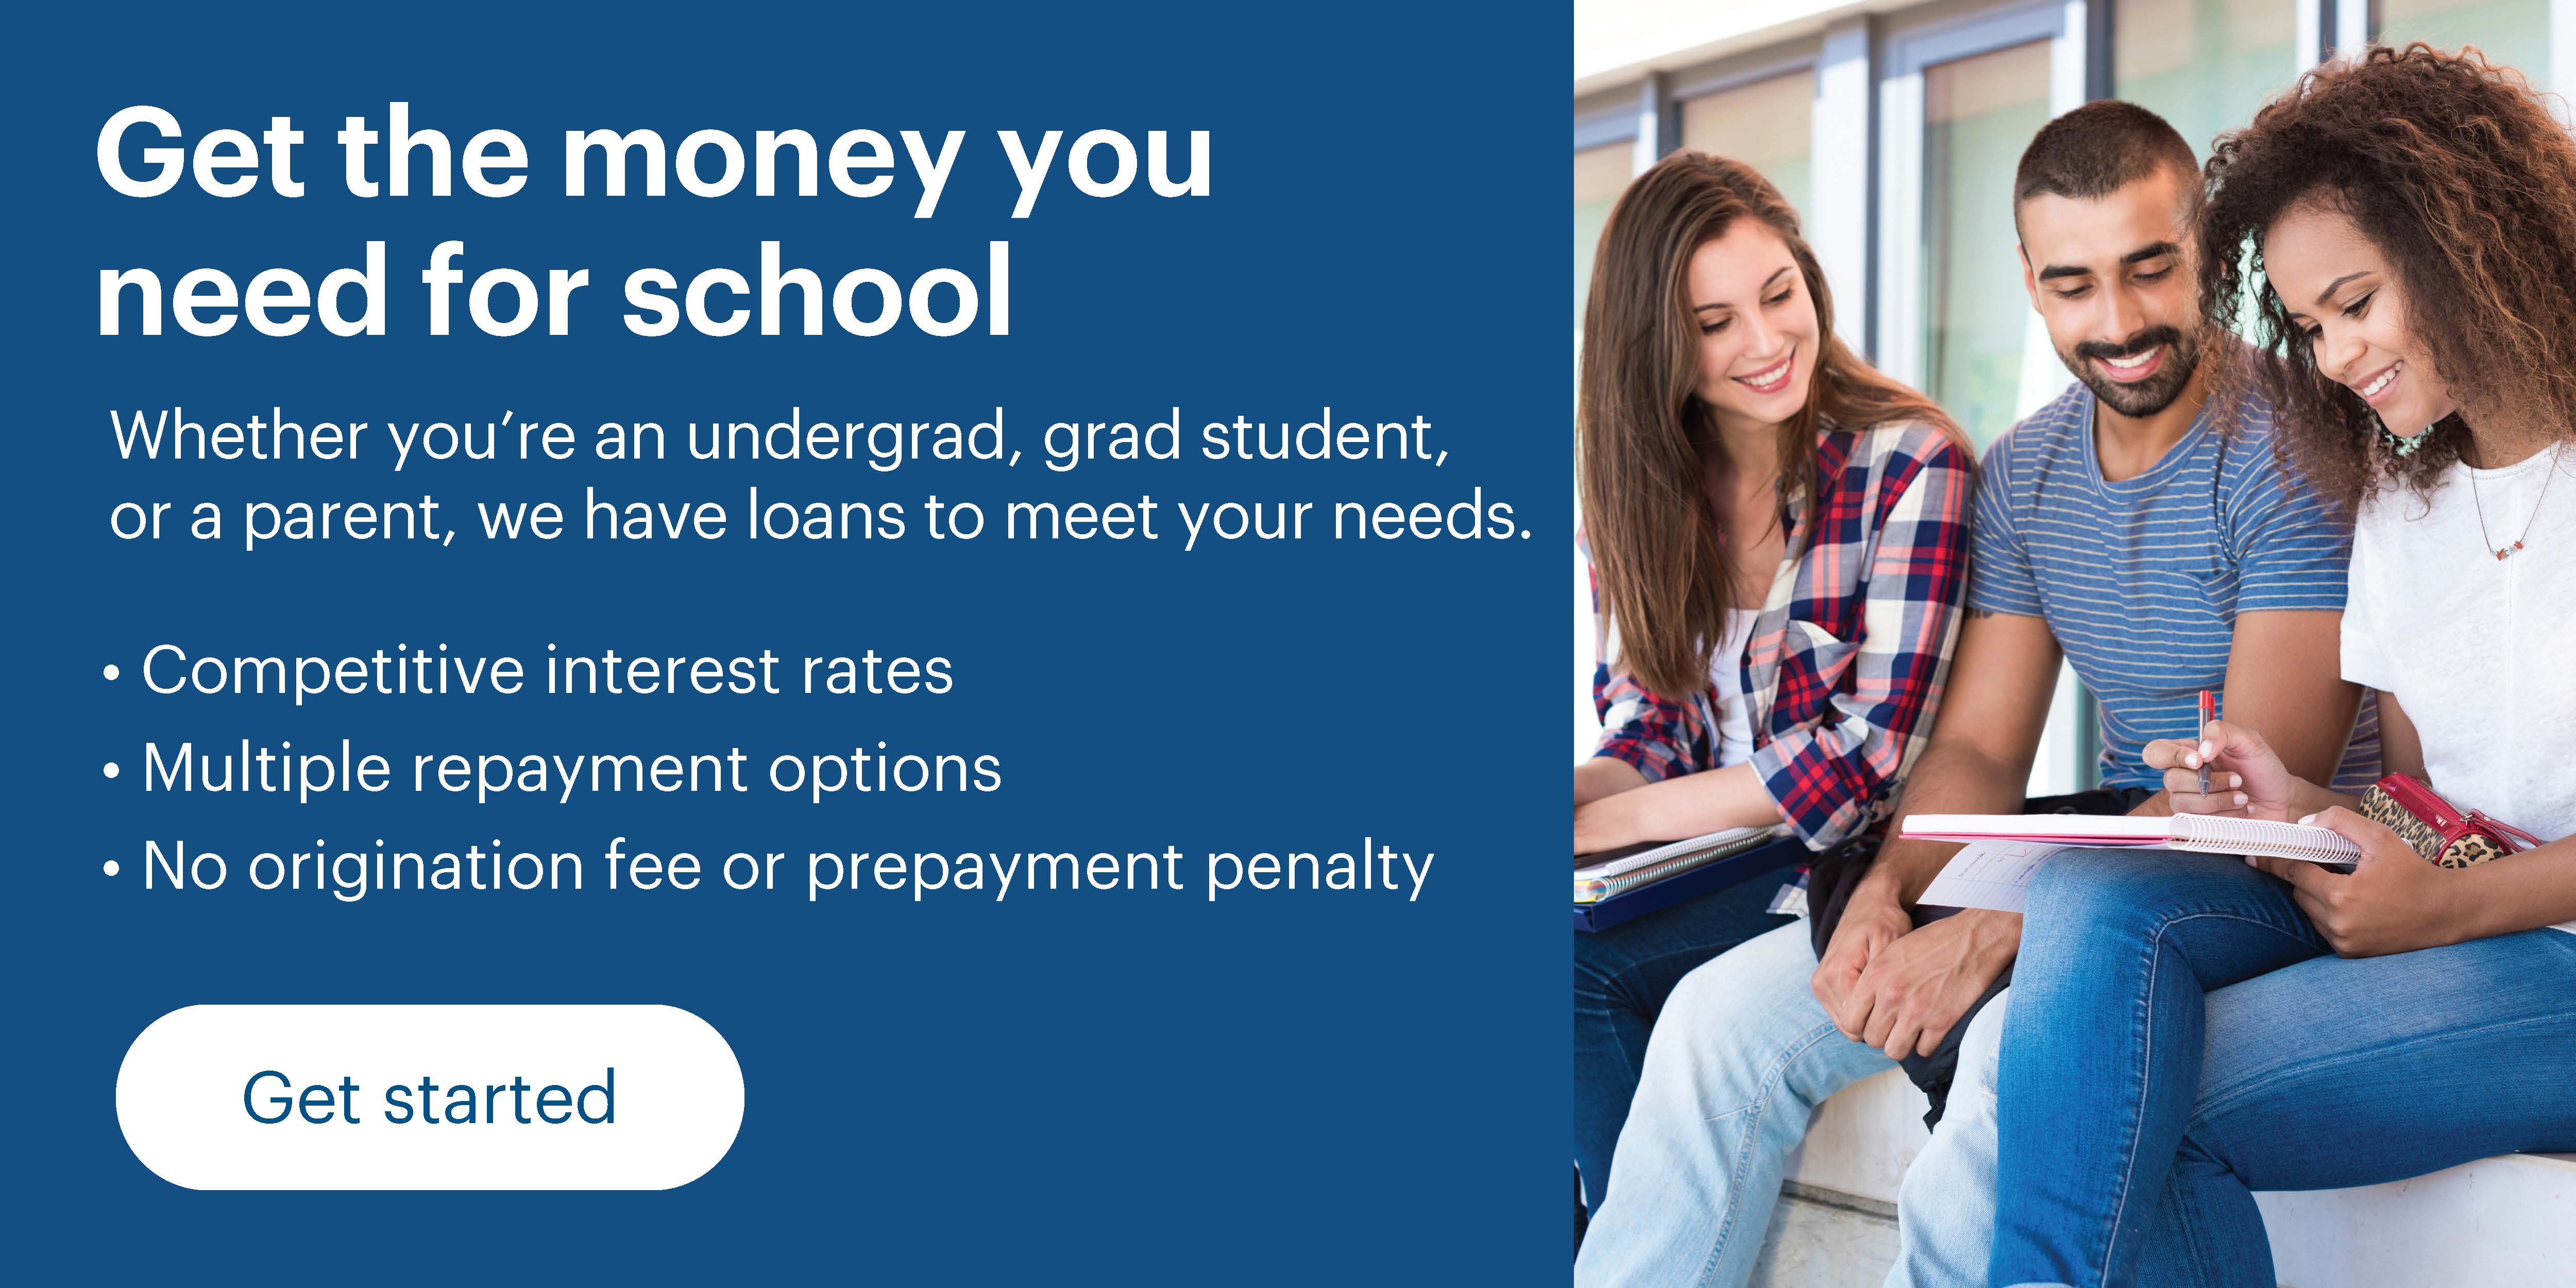 Get the money you need for school. Whether you're an undergrad, grad student, or a parent, we have loans to meet your needs. Features include competitive interest rates, multiple repayment options, and no origination fee or prepayment penalty. Click here to get started.